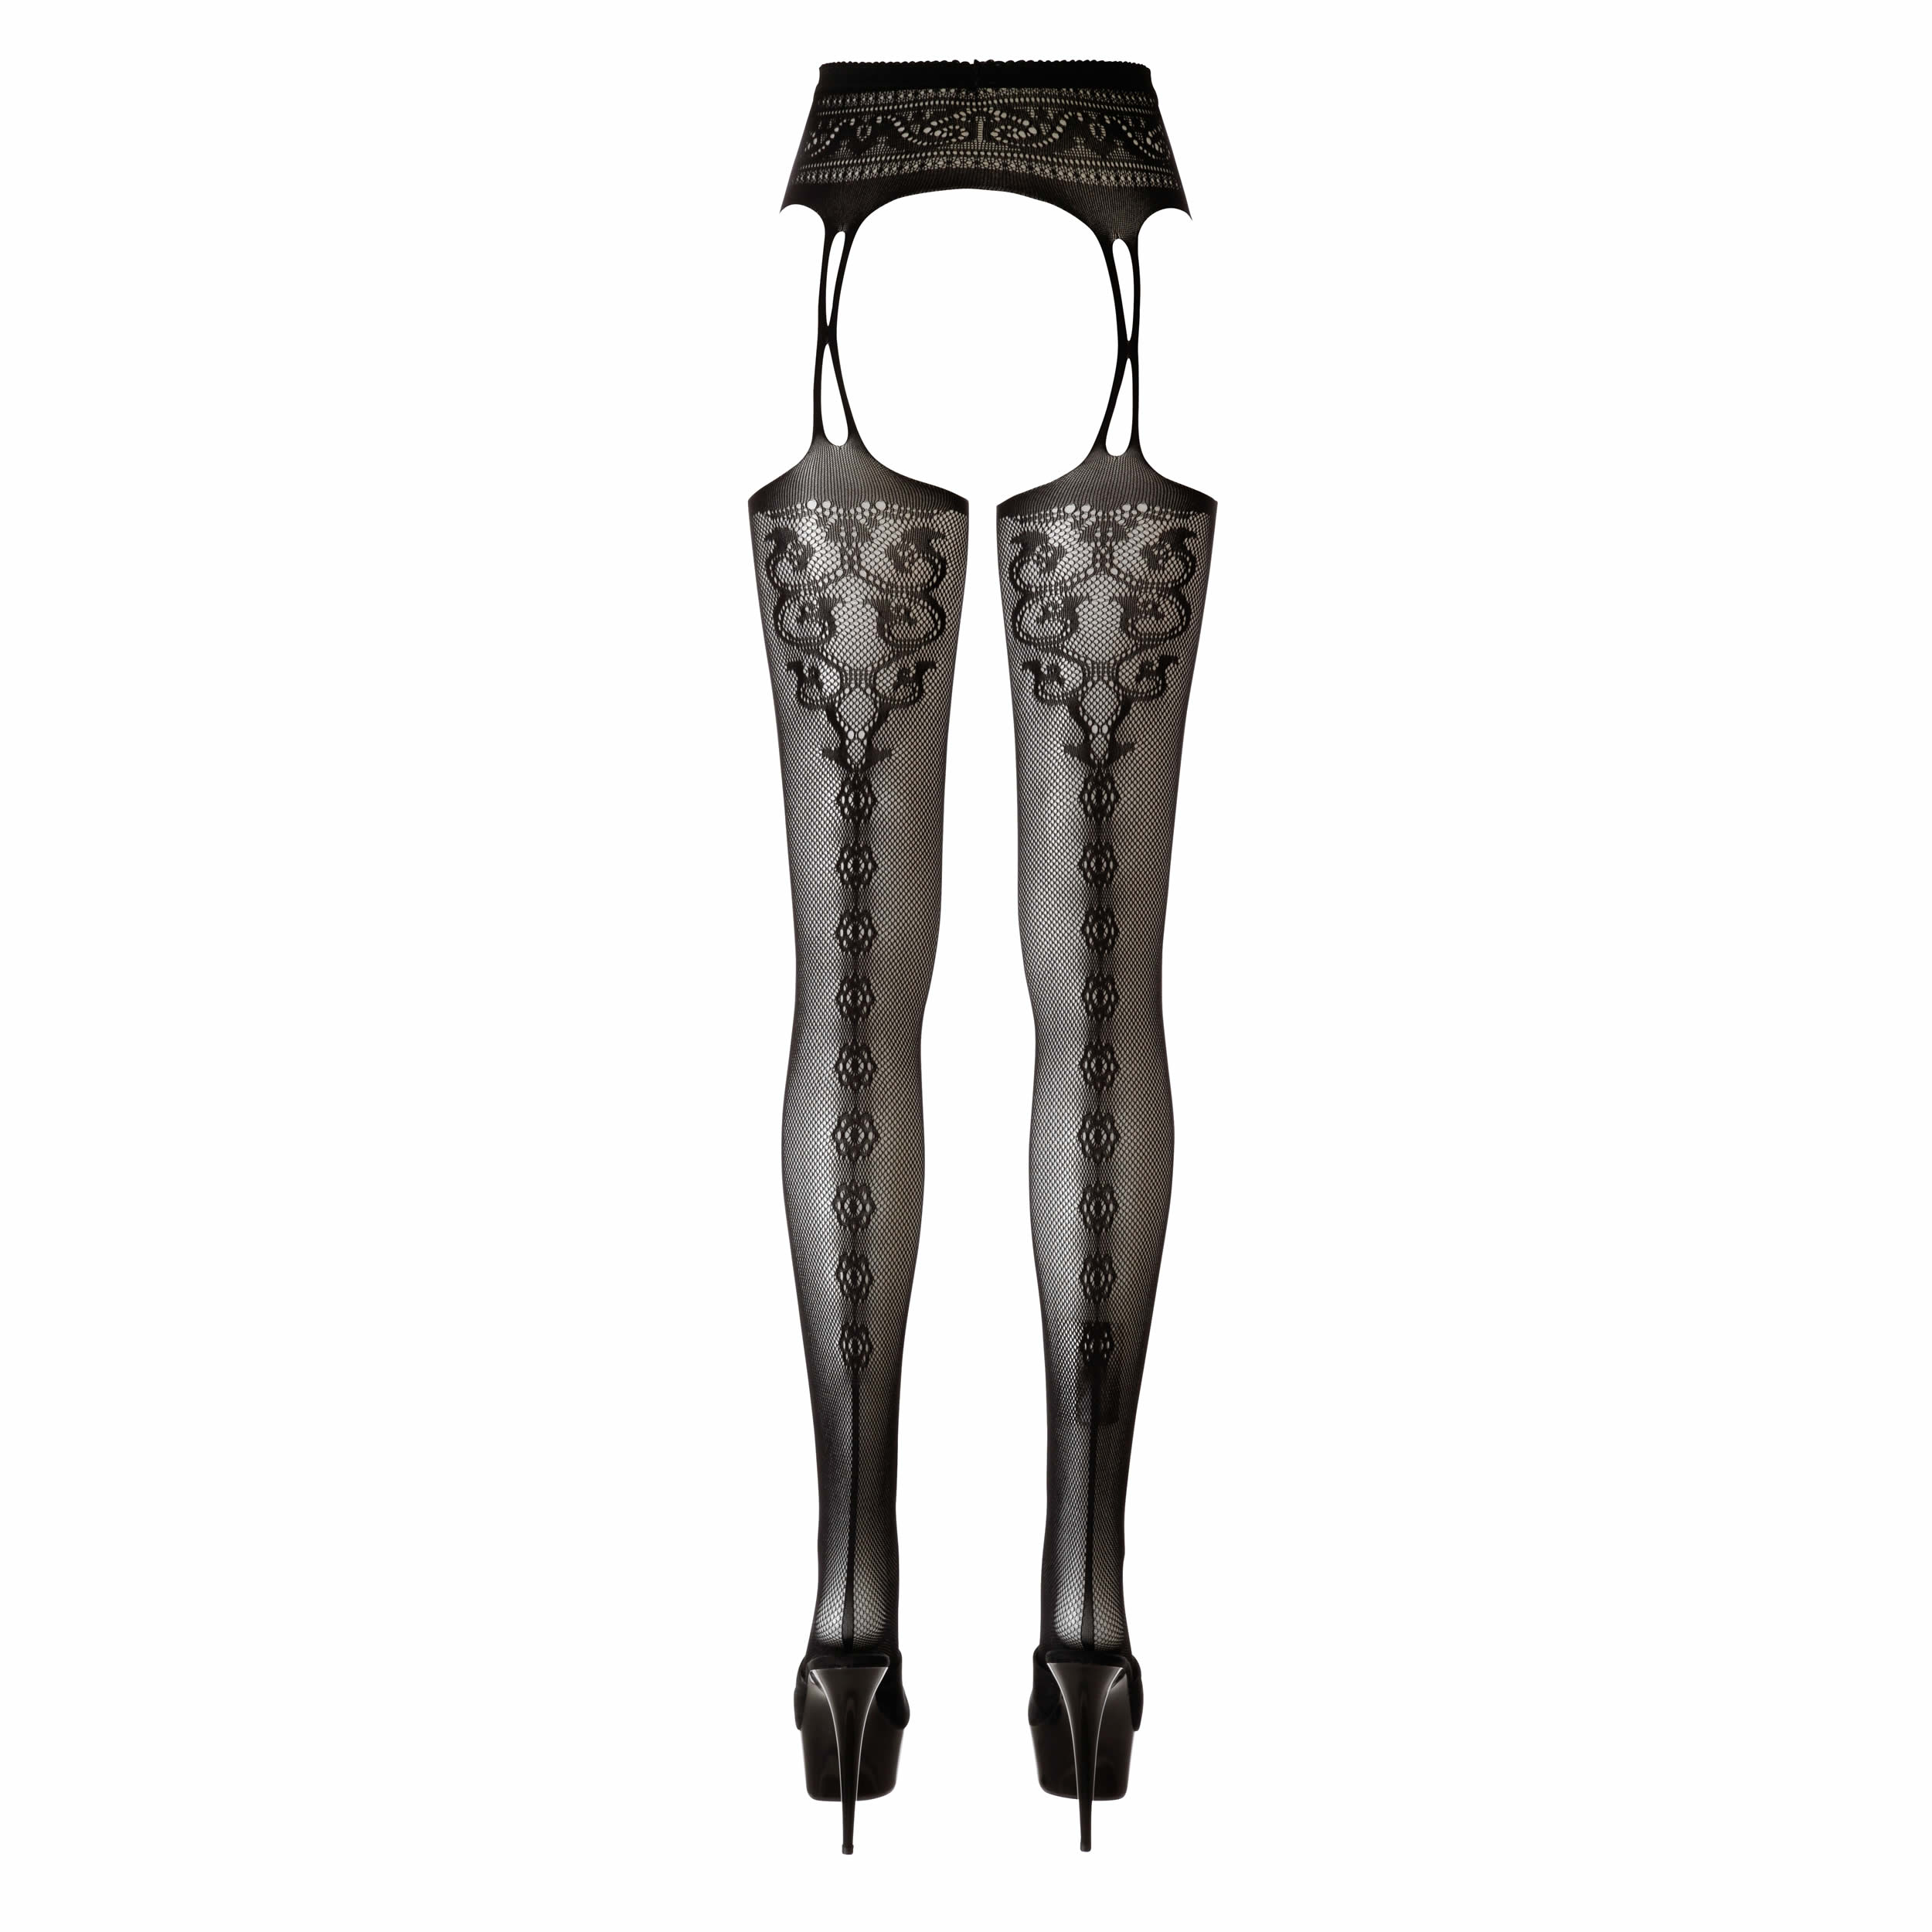 Suspender Belt and Net Stockings with Lace and Seam